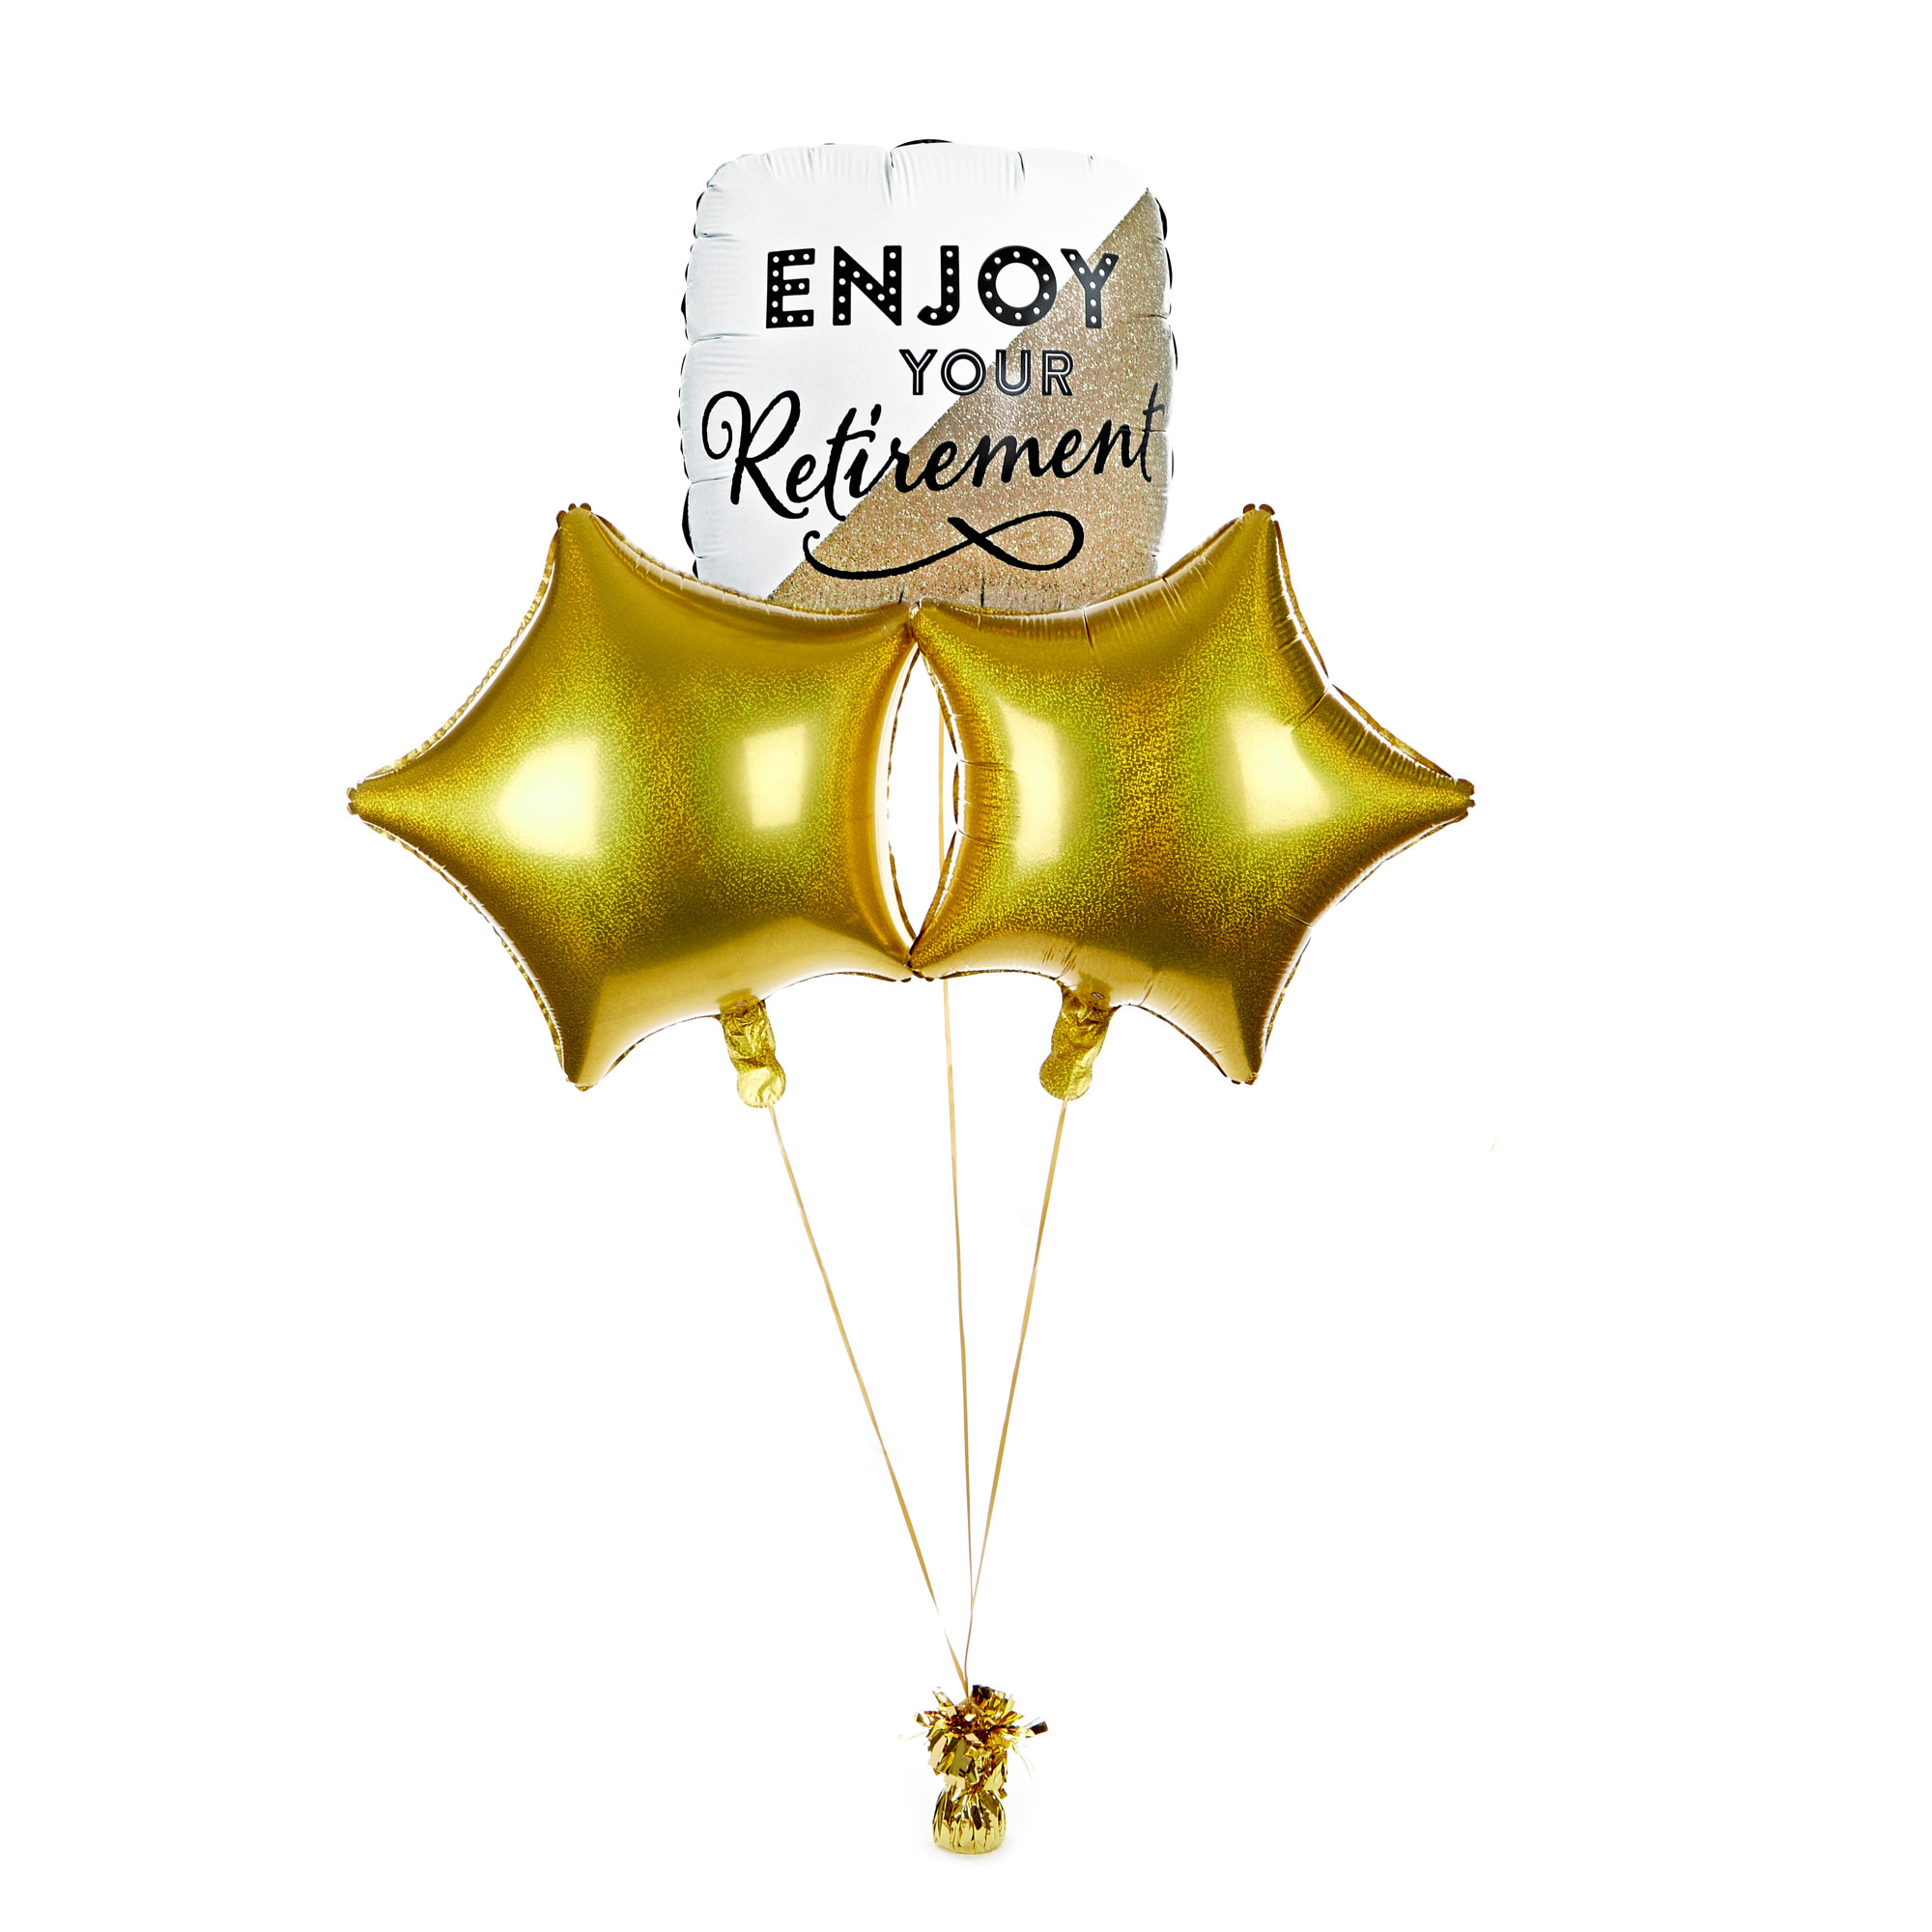 Enjoy Your Retirement Balloon Bouquet - DELIVERED INFLATED!